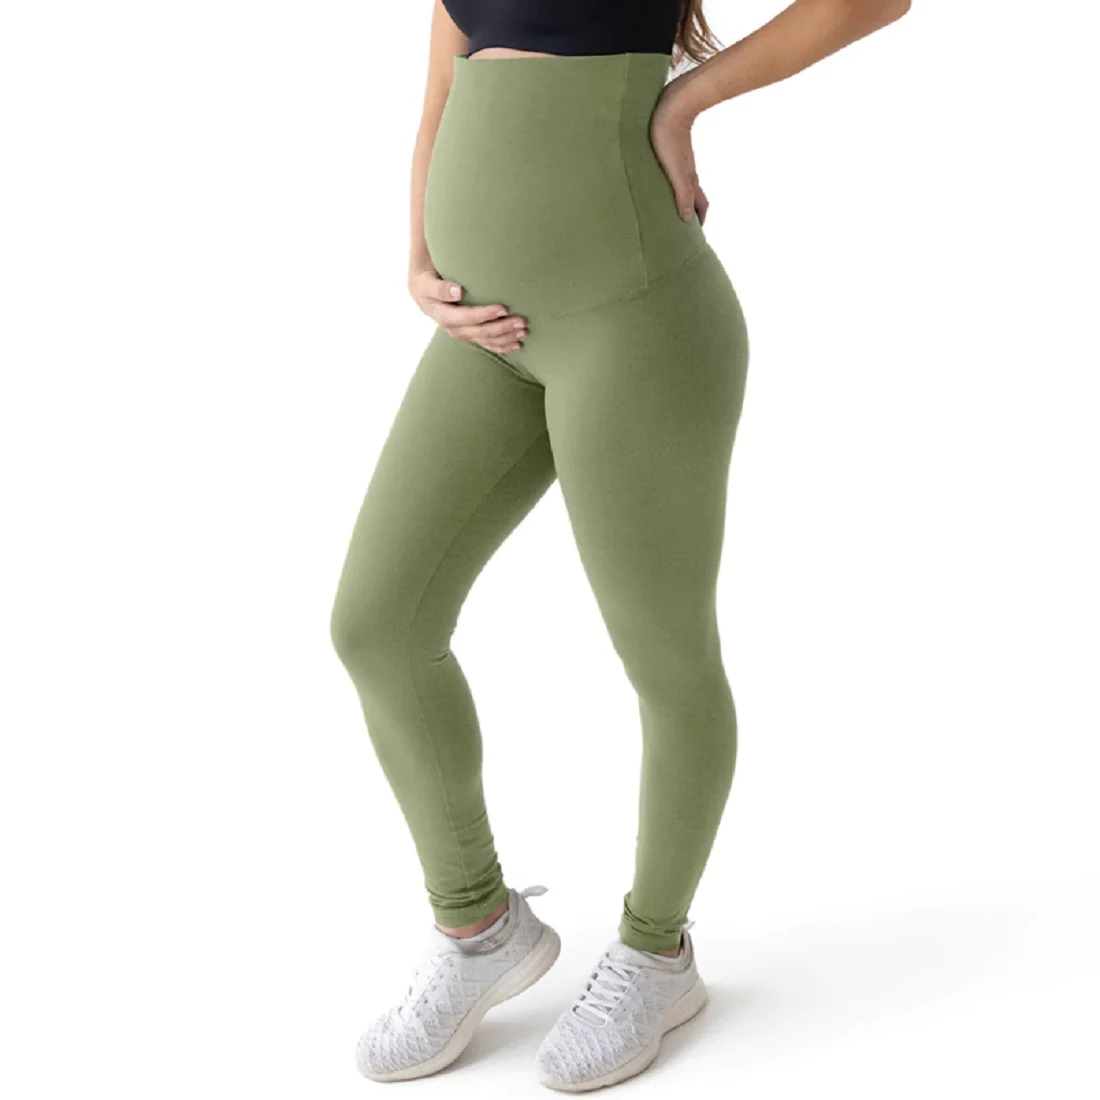 Battle of CRZ Yoga Leggings!  ranking each collection, try on +